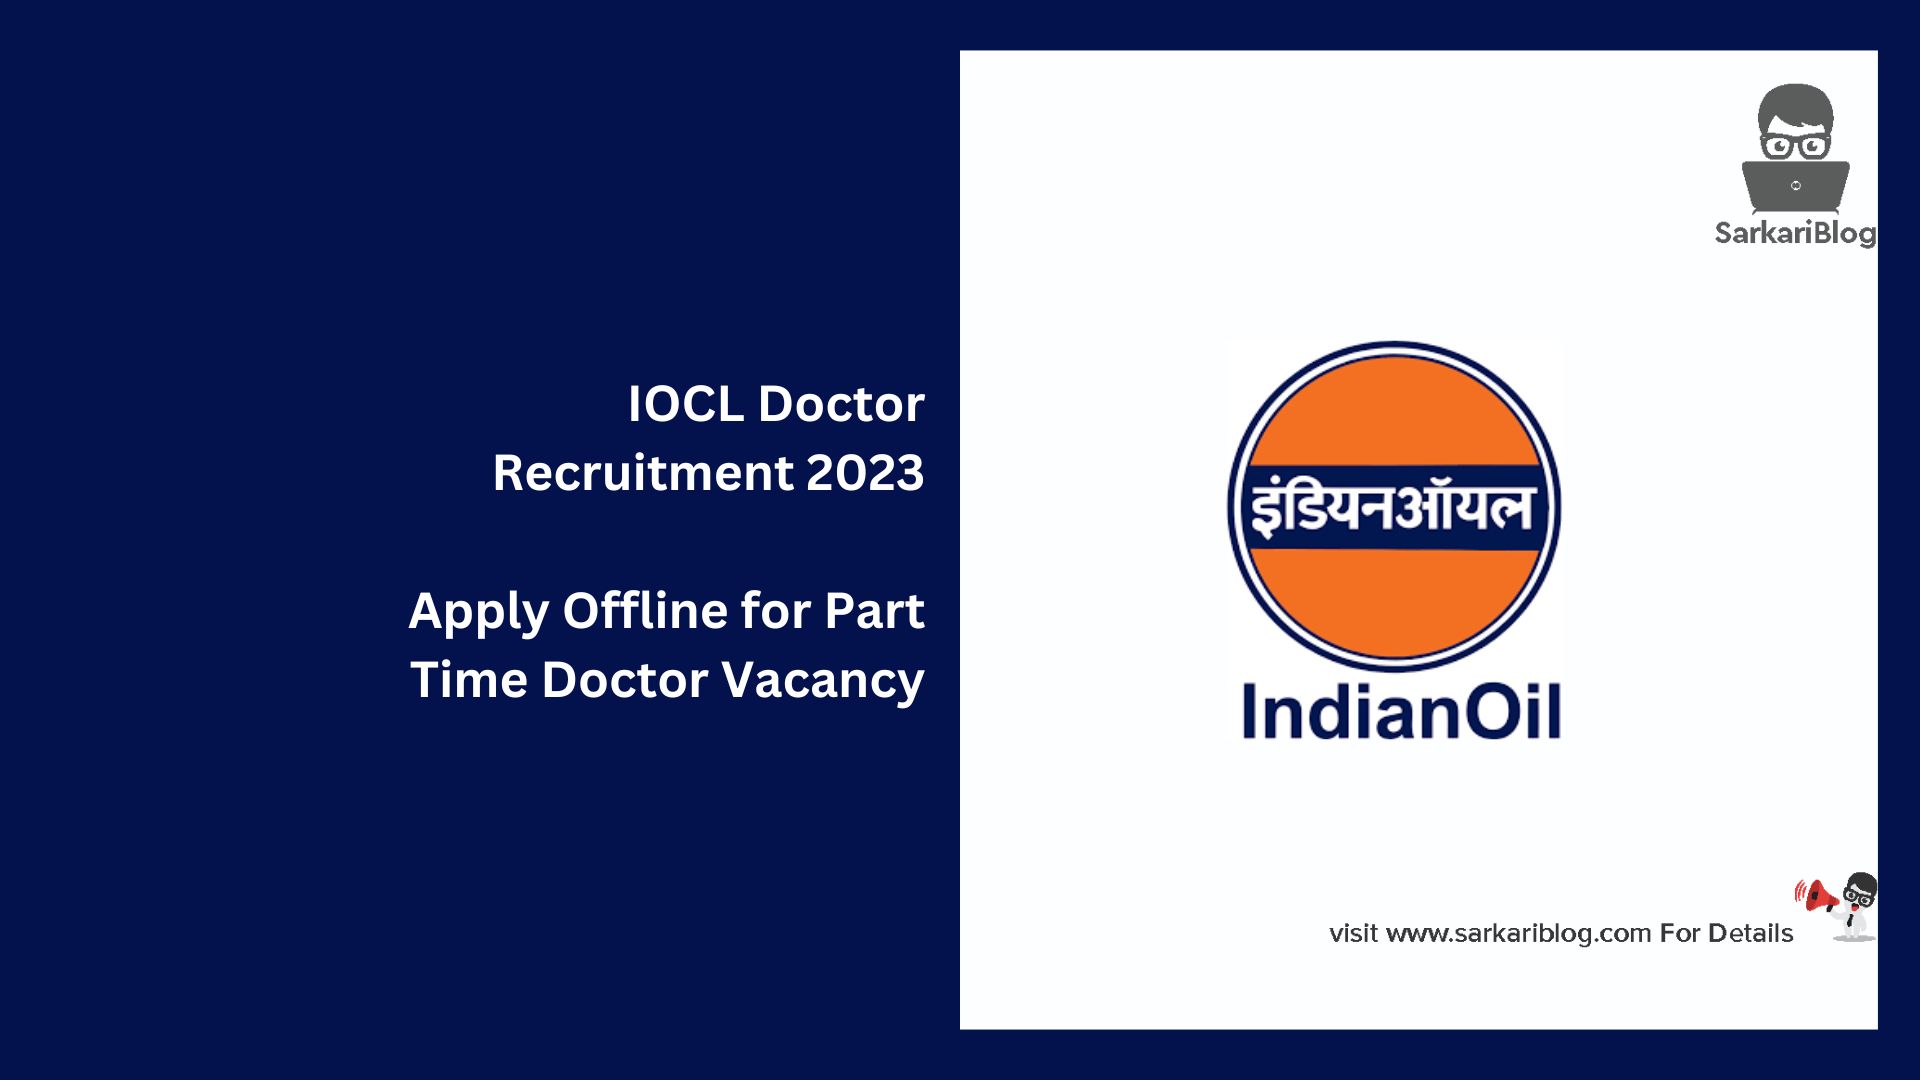 IOCL Doctor Recruitment 2023